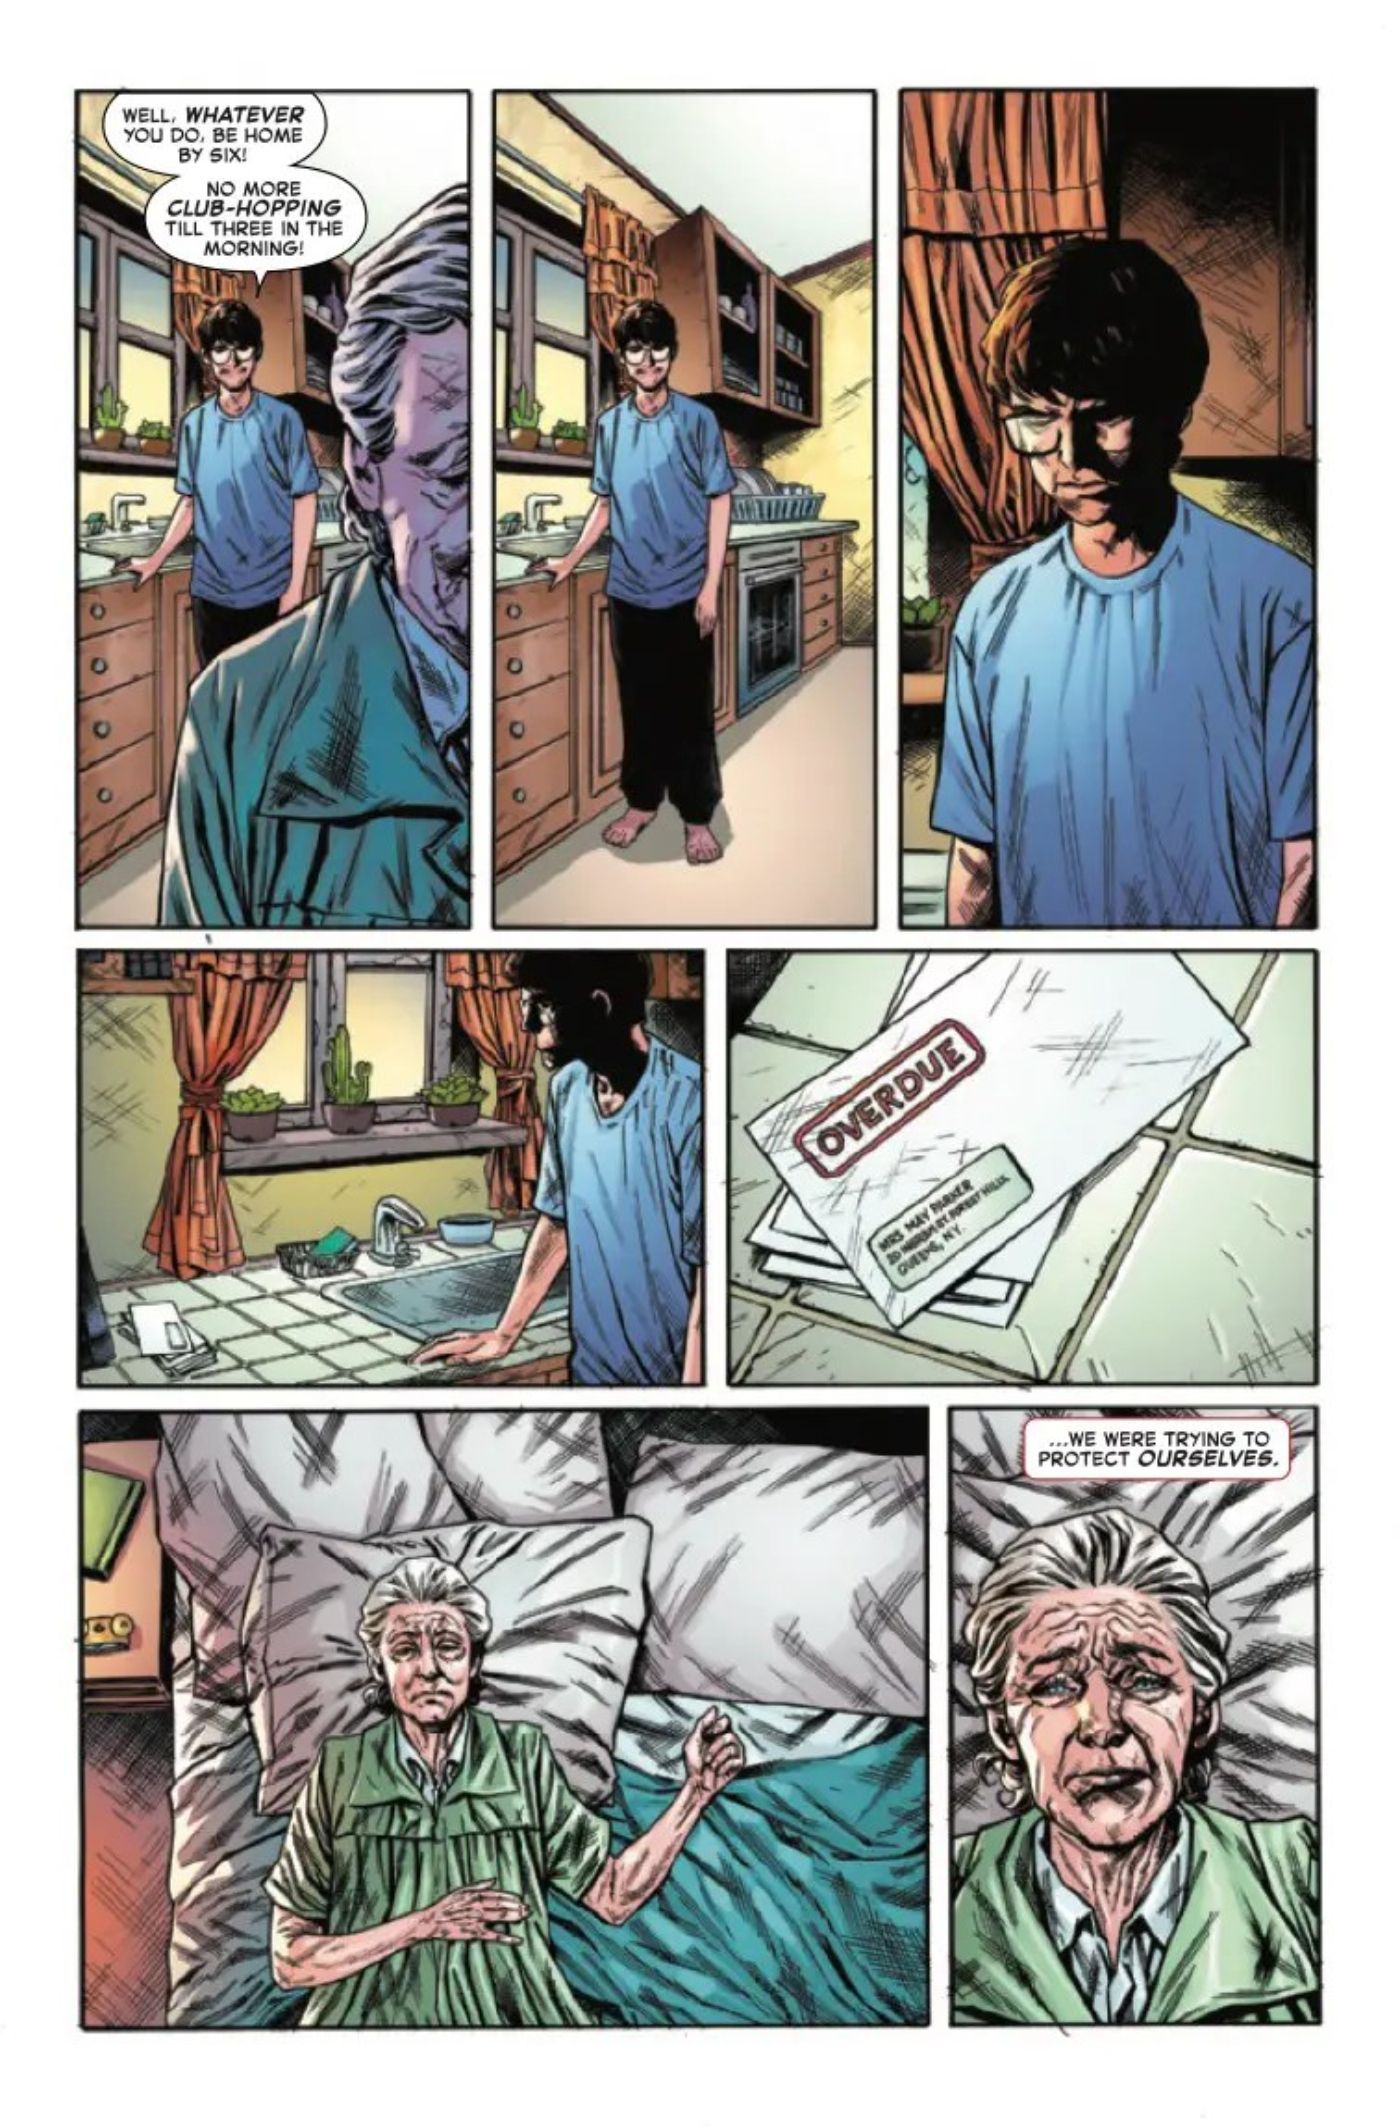 Spider-Man: Shadow of the Green Goblin #1 comic page showing Peter and May grieving over the loss of Uncle Ben.